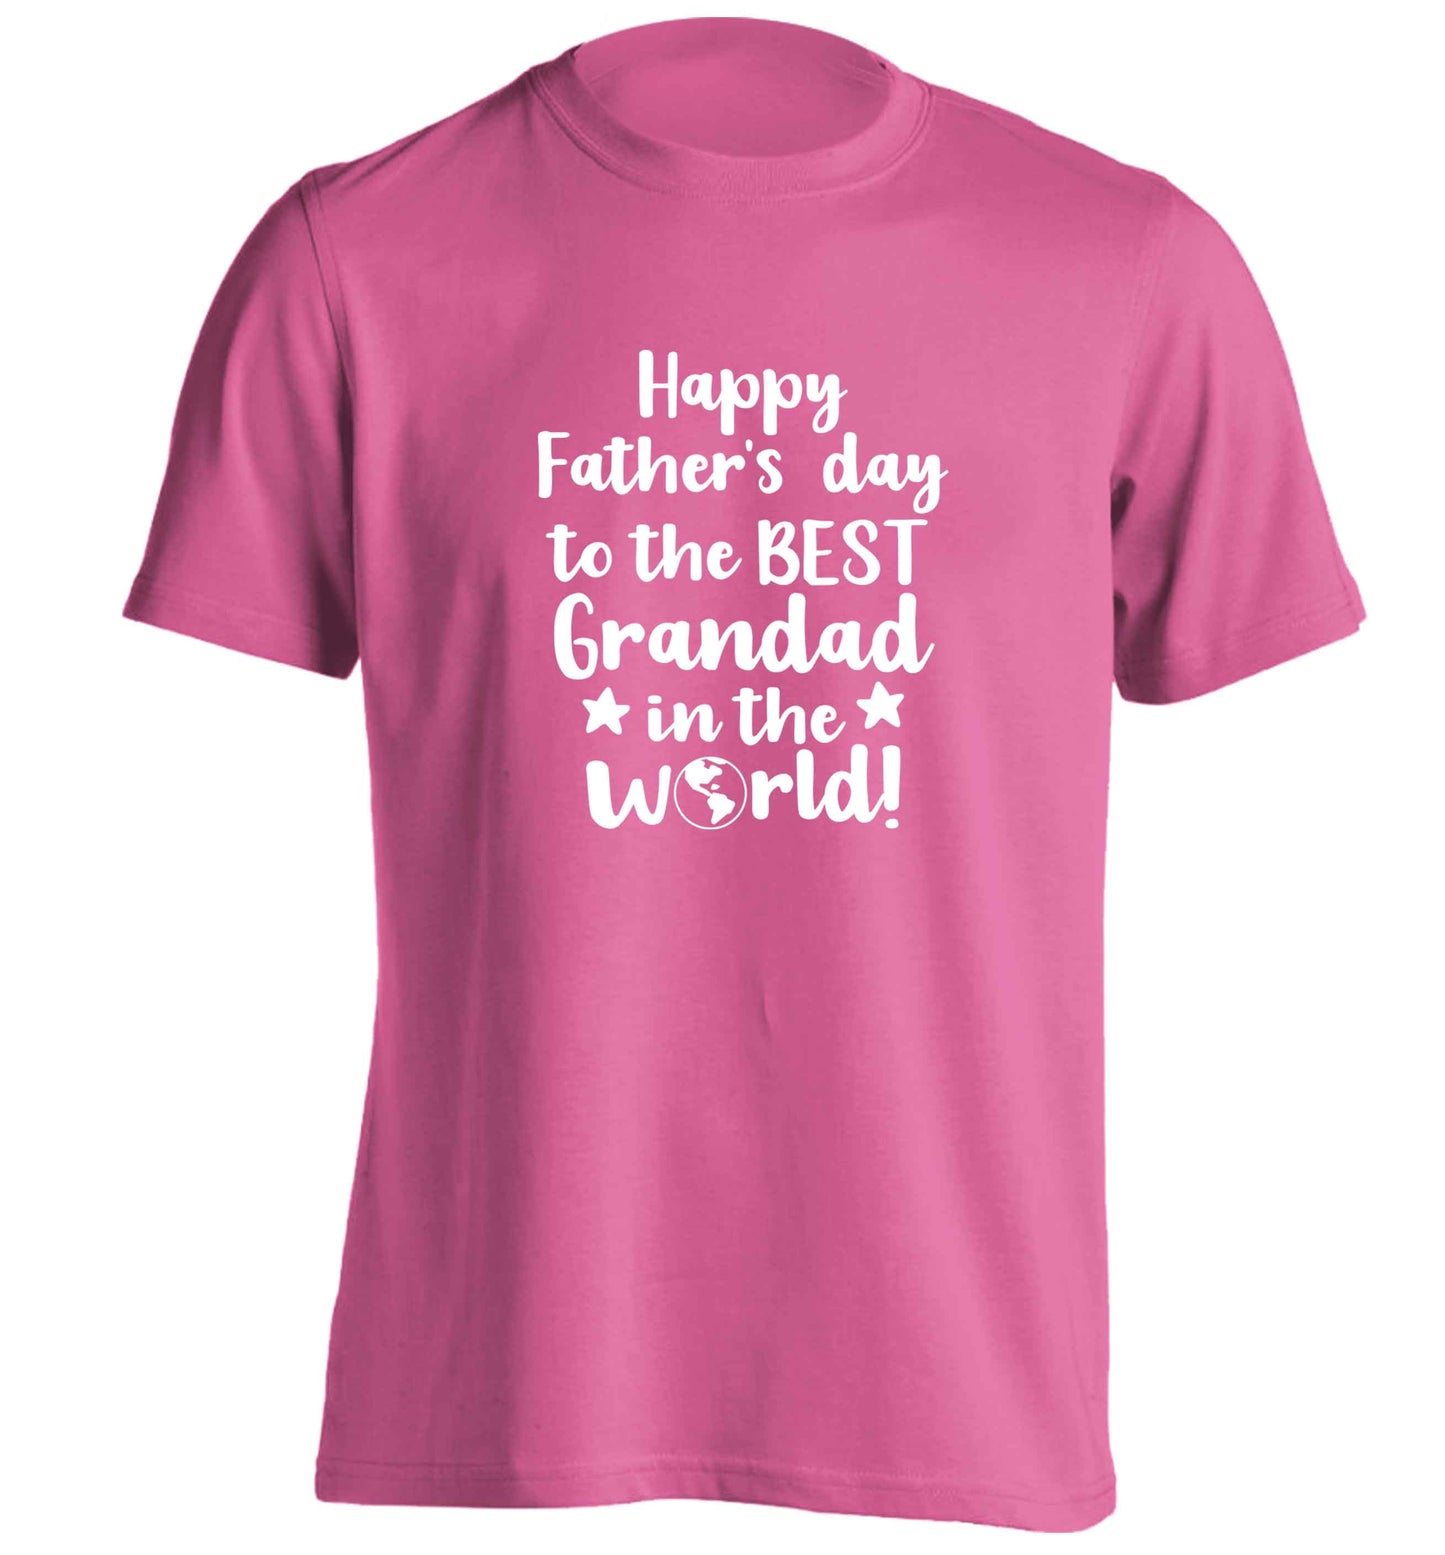 Happy Father's day to the best grandad in the world adults unisex pink Tshirt 2XL